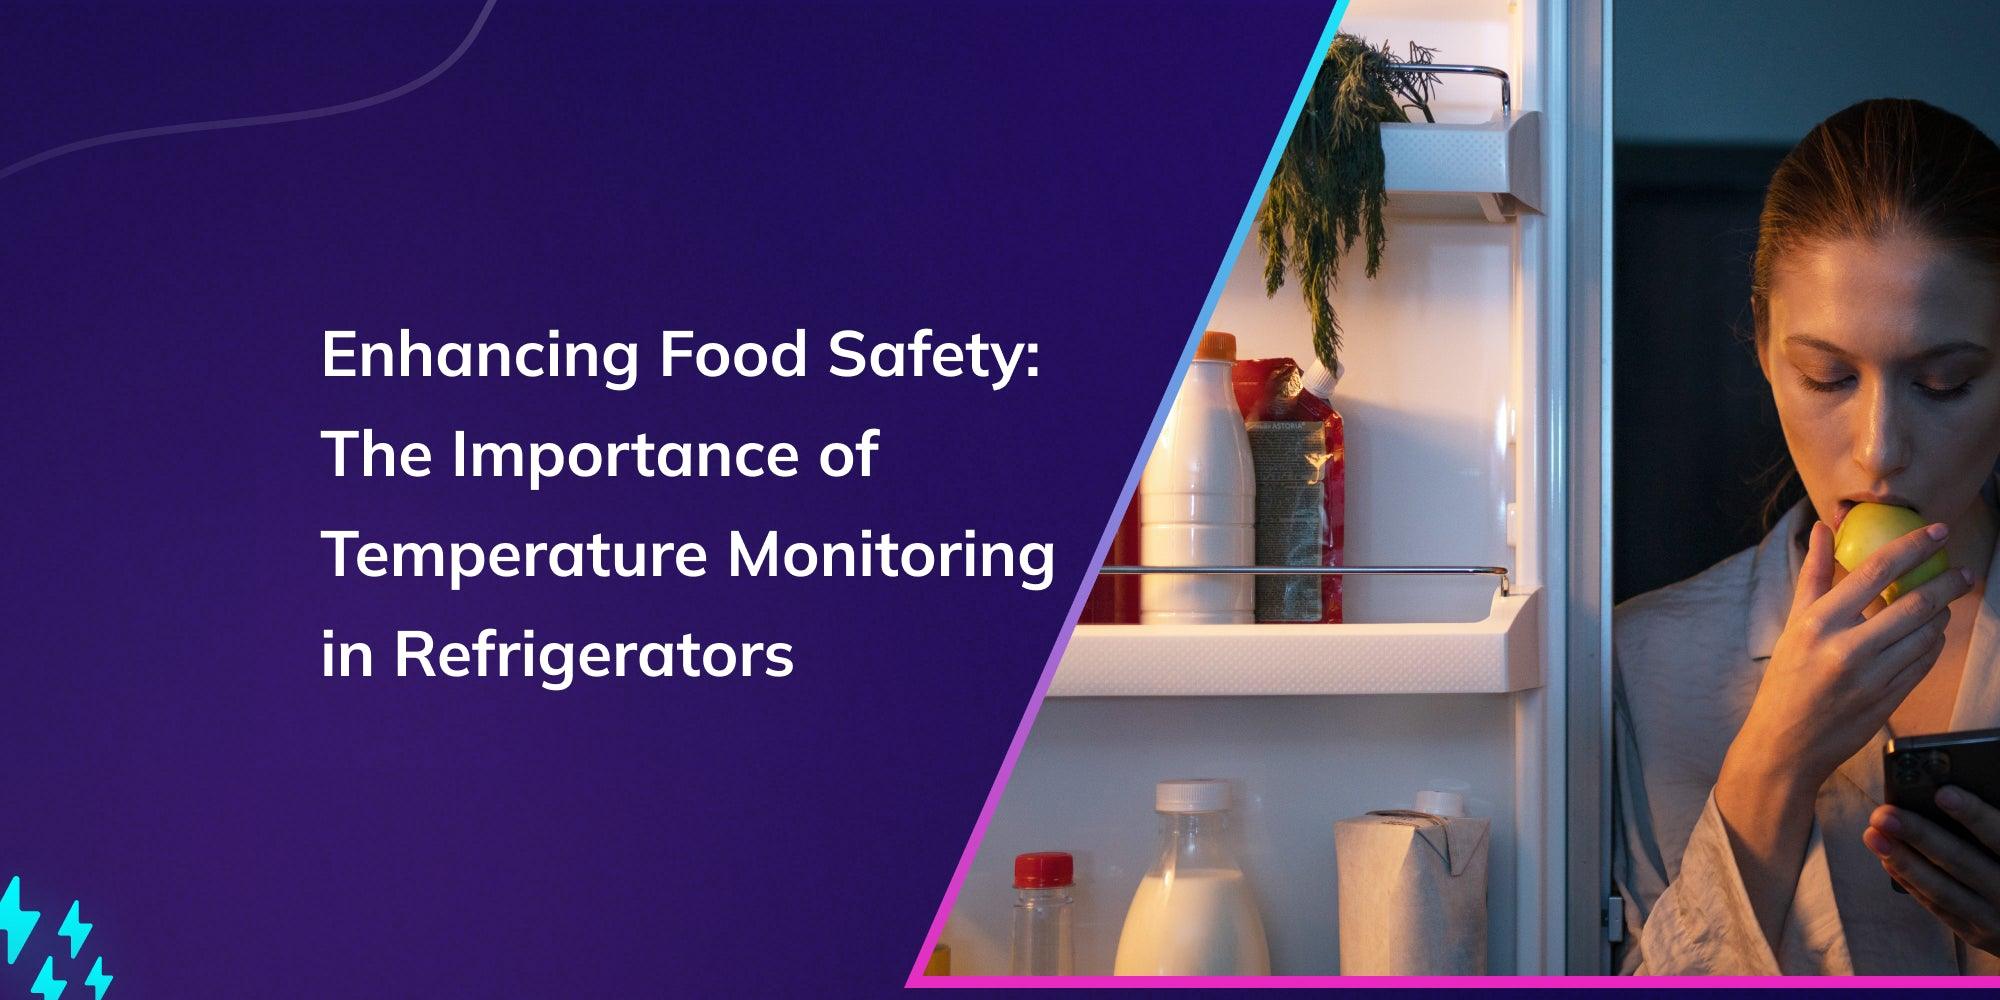 Enhancing Food Safety: The Importance of Temperature Monitoring in Refrigerators